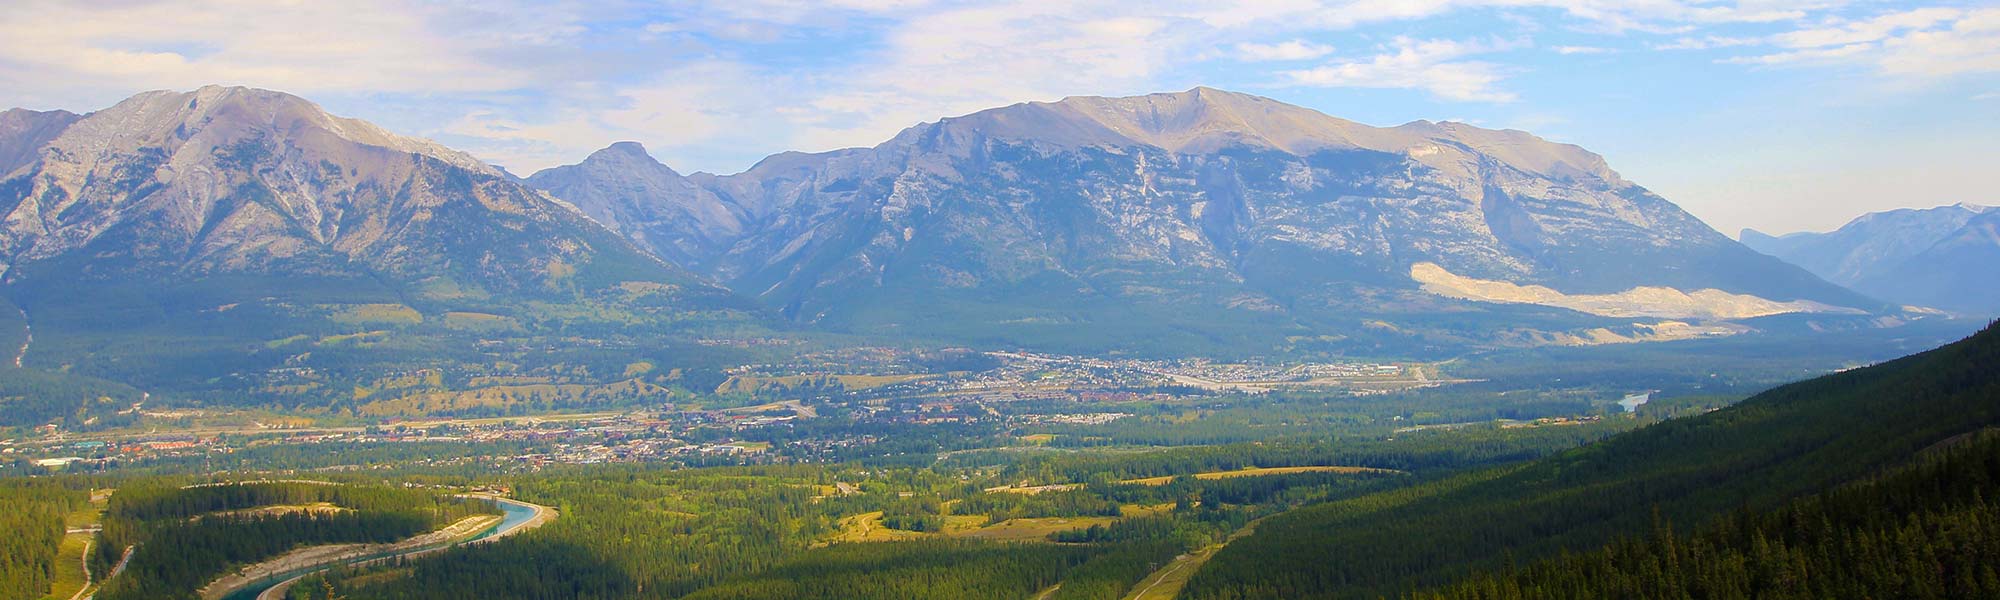 View point over looking the Canmore townsite and the Bow Valley.